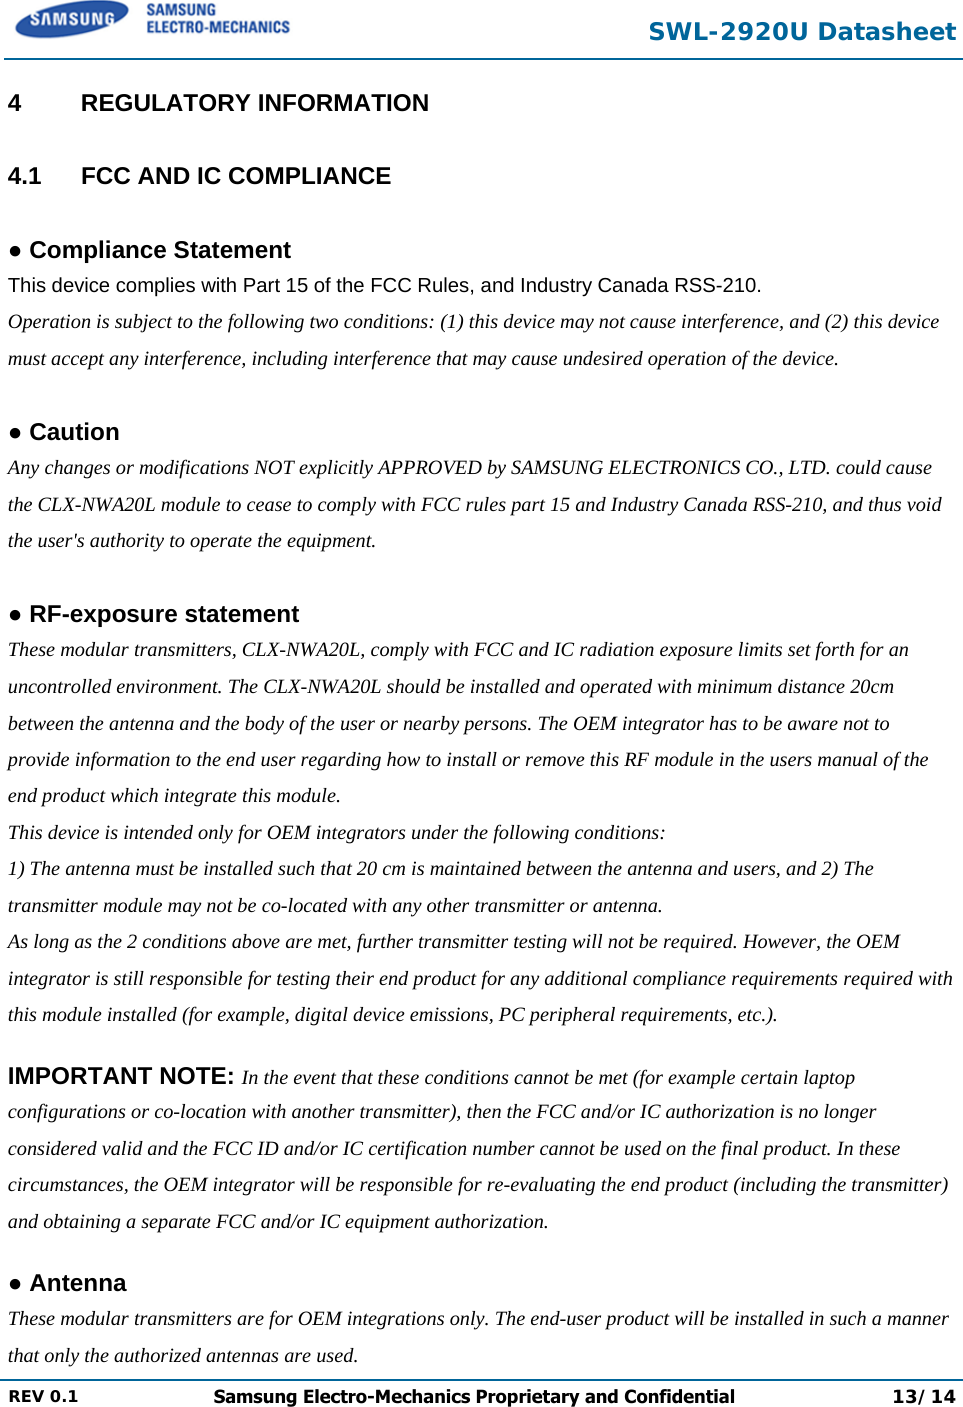  SWL-2920U Datasheet  REV 0.1  Samsung Electro-Mechanics Proprietary and Confidential 13/14  4 REGULATORY INFORMATION  4.1  FCC AND IC COMPLIANCE  ● Compliance Statement This device complies with Part 15 of the FCC Rules, and Industry Canada RSS-210. Operation is subject to the following two conditions: (1) this device may not cause interference, and (2) this device must accept any interference, including interference that may cause undesired operation of the device.  ● Caution Any changes or modifications NOT explicitly APPROVED by SAMSUNG ELECTRONICS CO., LTD. could cause the CLX-NWA20L module to cease to comply with FCC rules part 15 and Industry Canada RSS-210, and thus void the user&apos;s authority to operate the equipment.  ● RF-exposure statement These modular transmitters, CLX-NWA20L, comply with FCC and IC radiation exposure limits set forth for an uncontrolled environment. The CLX-NWA20L should be installed and operated with minimum distance 20cm between the antenna and the body of the user or nearby persons. The OEM integrator has to be aware not to provide information to the end user regarding how to install or remove this RF module in the users manual of the end product which integrate this module.  This device is intended only for OEM integrators under the following conditions: 1) The antenna must be installed such that 20 cm is maintained between the antenna and users, and 2) The transmitter module may not be co-located with any other transmitter or antenna. As long as the 2 conditions above are met, further transmitter testing will not be required. However, the OEM integrator is still responsible for testing their end product for any additional compliance requirements required with this module installed (for example, digital device emissions, PC peripheral requirements, etc.).  IMPORTANT NOTE: In the event that these conditions cannot be met (for example certain laptop configurations or co-location with another transmitter), then the FCC and/or IC authorization is no longer considered valid and the FCC ID and/or IC certification number cannot be used on the final product. In these circumstances, the OEM integrator will be responsible for re-evaluating the end product (including the transmitter) and obtaining a separate FCC and/or IC equipment authorization.  ● Antenna These modular transmitters are for OEM integrations only. The end-user product will be installed in such a manner that only the authorized antennas are used. 